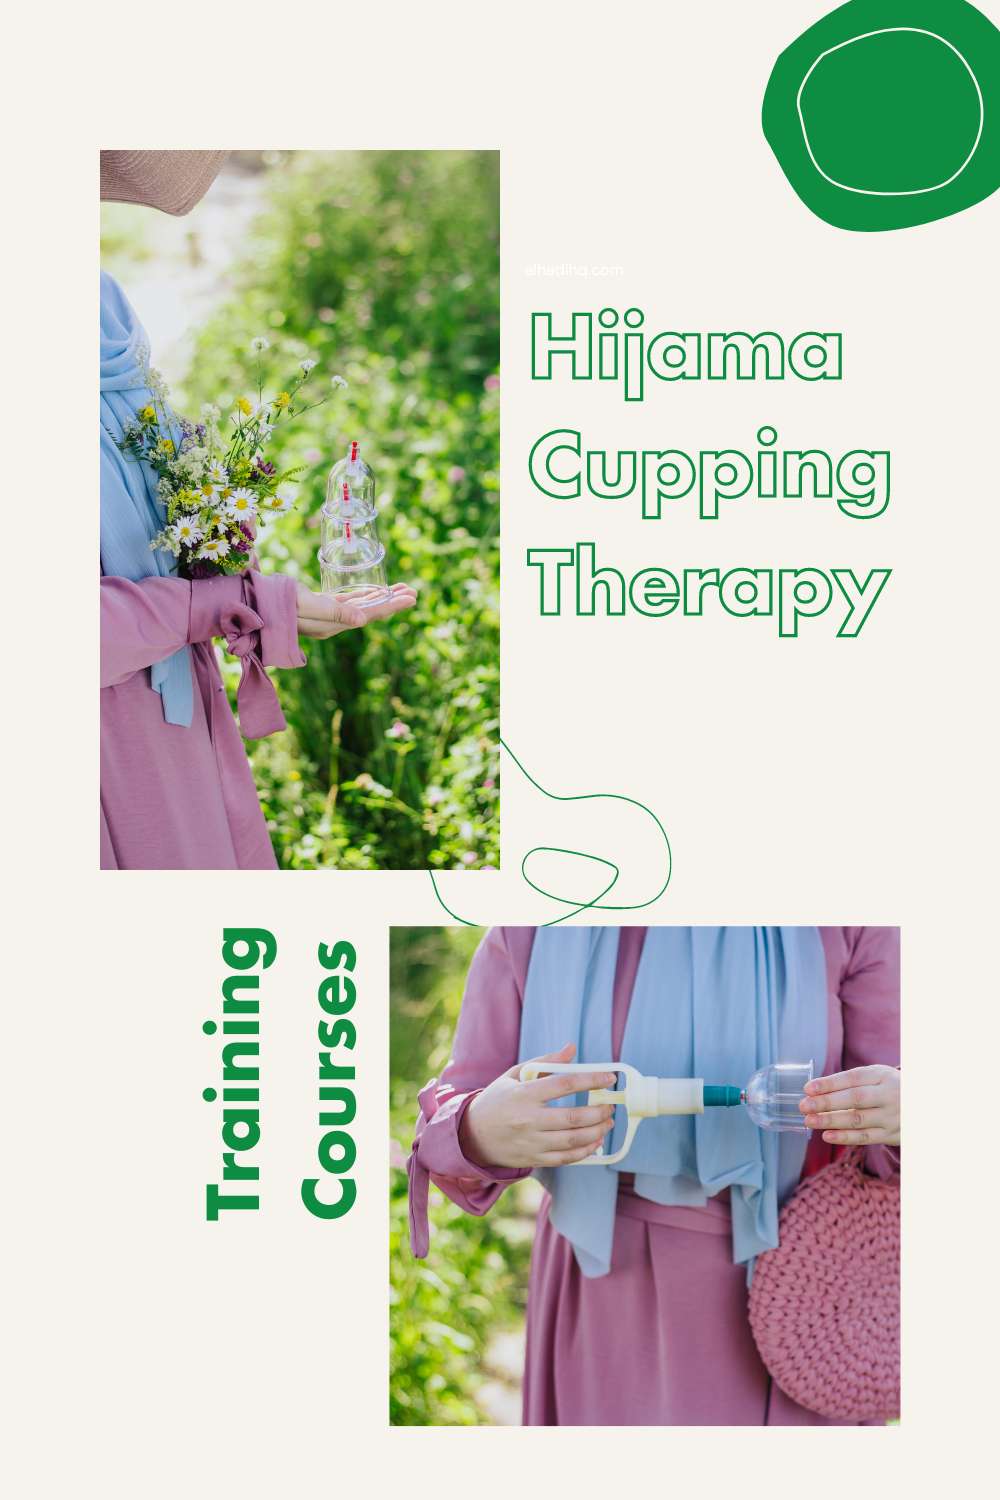 Cupping classes for massage therapist cupping therapy certification cupping therapy certification courses cupping training for massage therapists do you need a license to practice cupping hijama course hyderabad hijama course in hyderabad hijama diploma course hijama diploma course in hyderabad hijama training courses in hyderabad physical therapy cupping certification sports cupping course therapeutic cupping certification training for cupping therapy vacuum cupping course wet cupping certification wet cupping course where can i learn cupping therapy